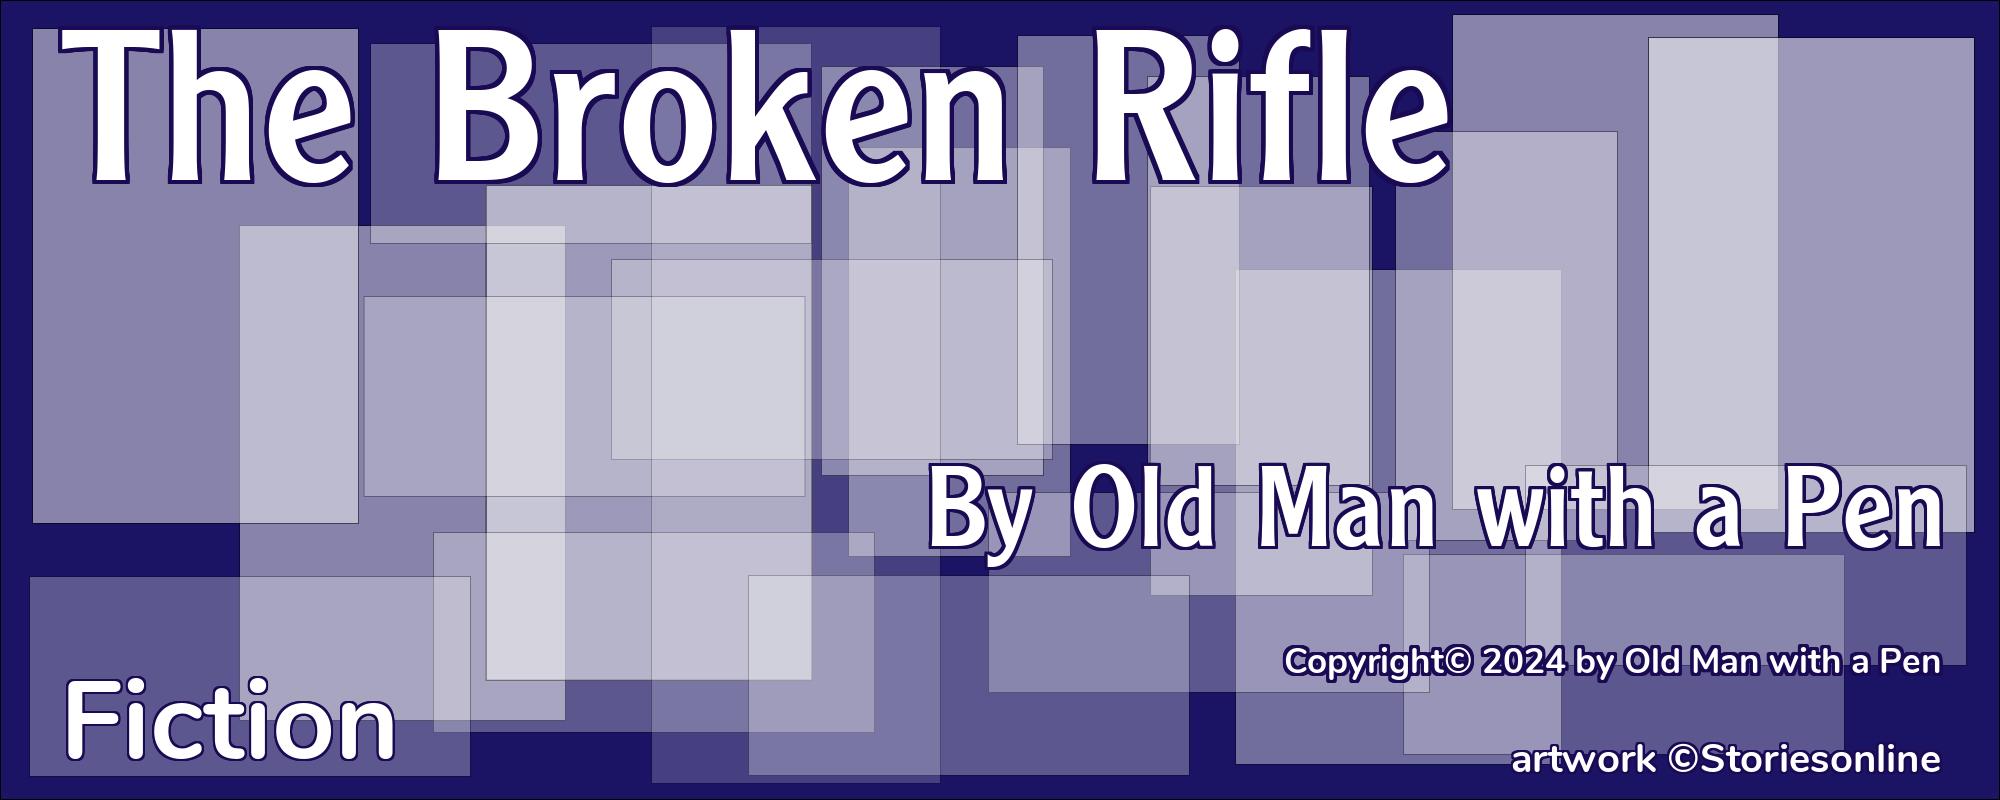 The Broken Rifle - Cover